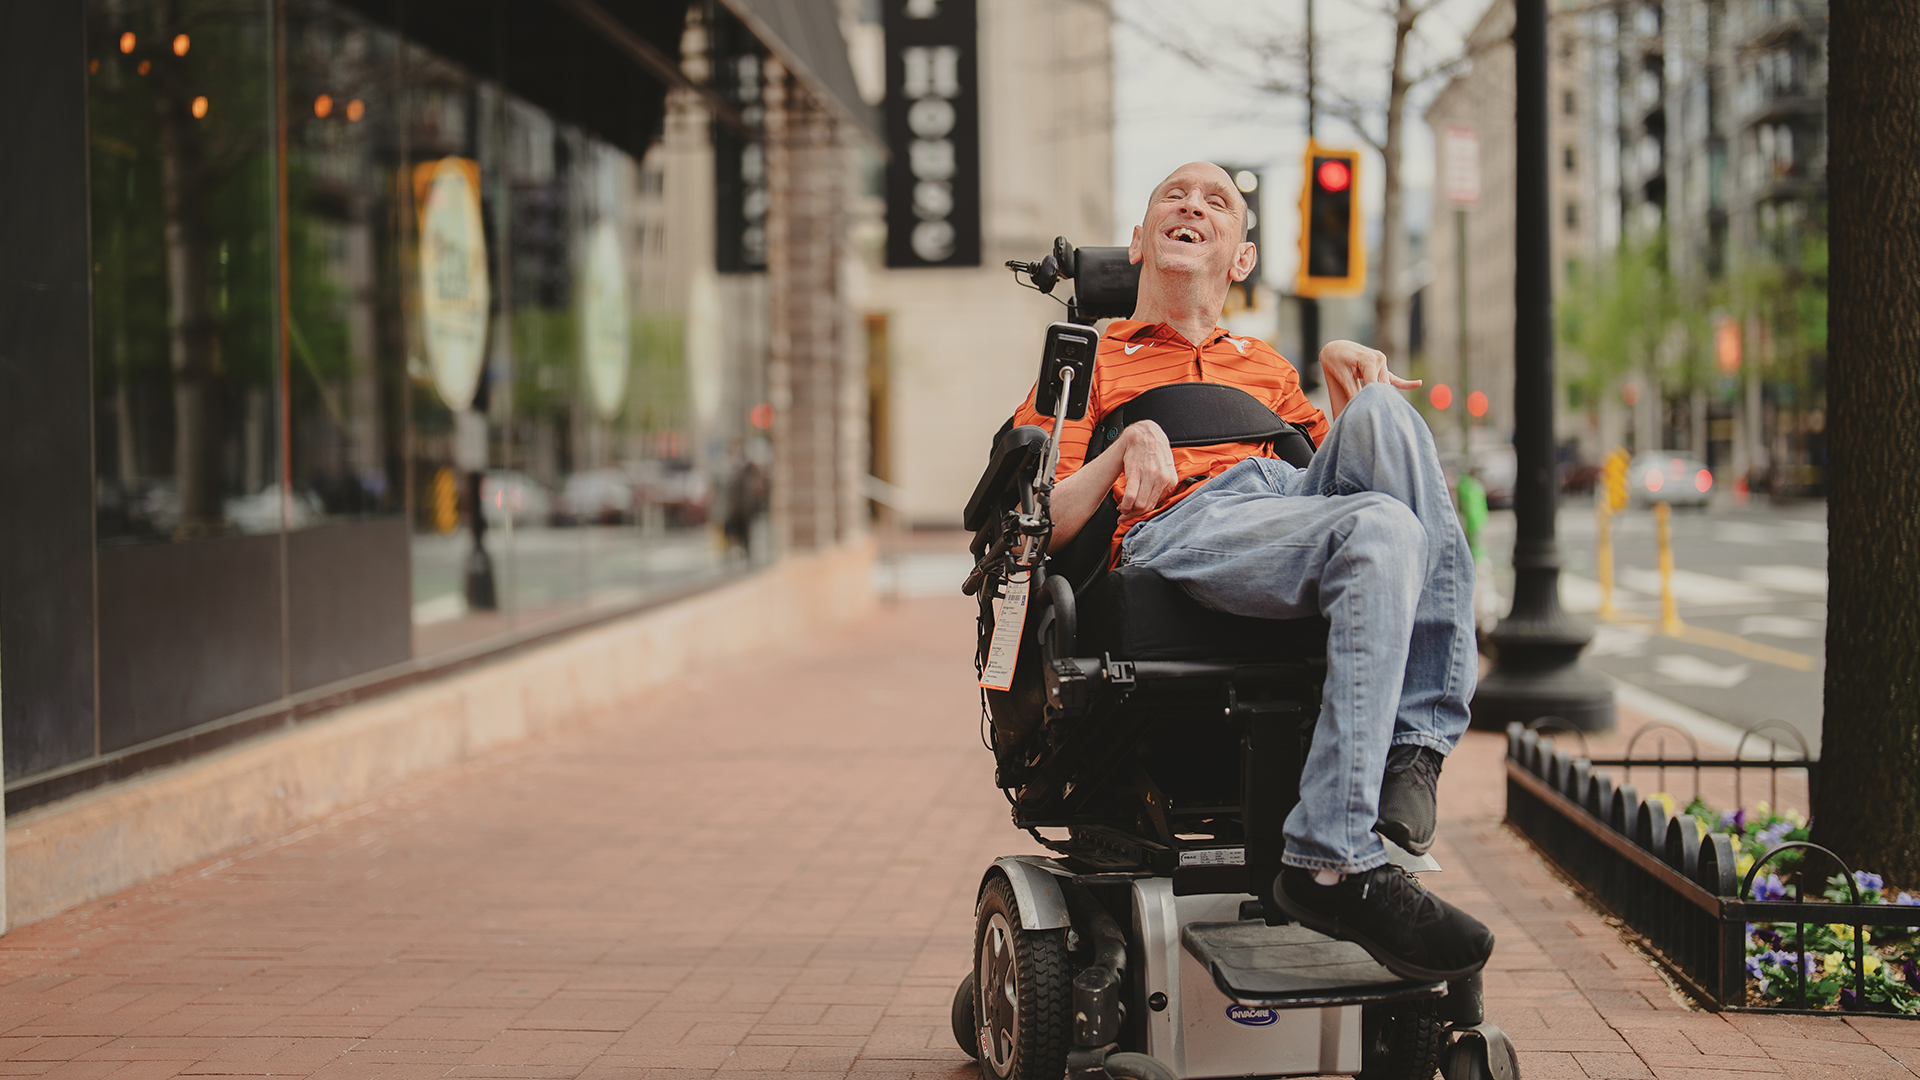 Man with cerebral palsy outside smiling warmly.